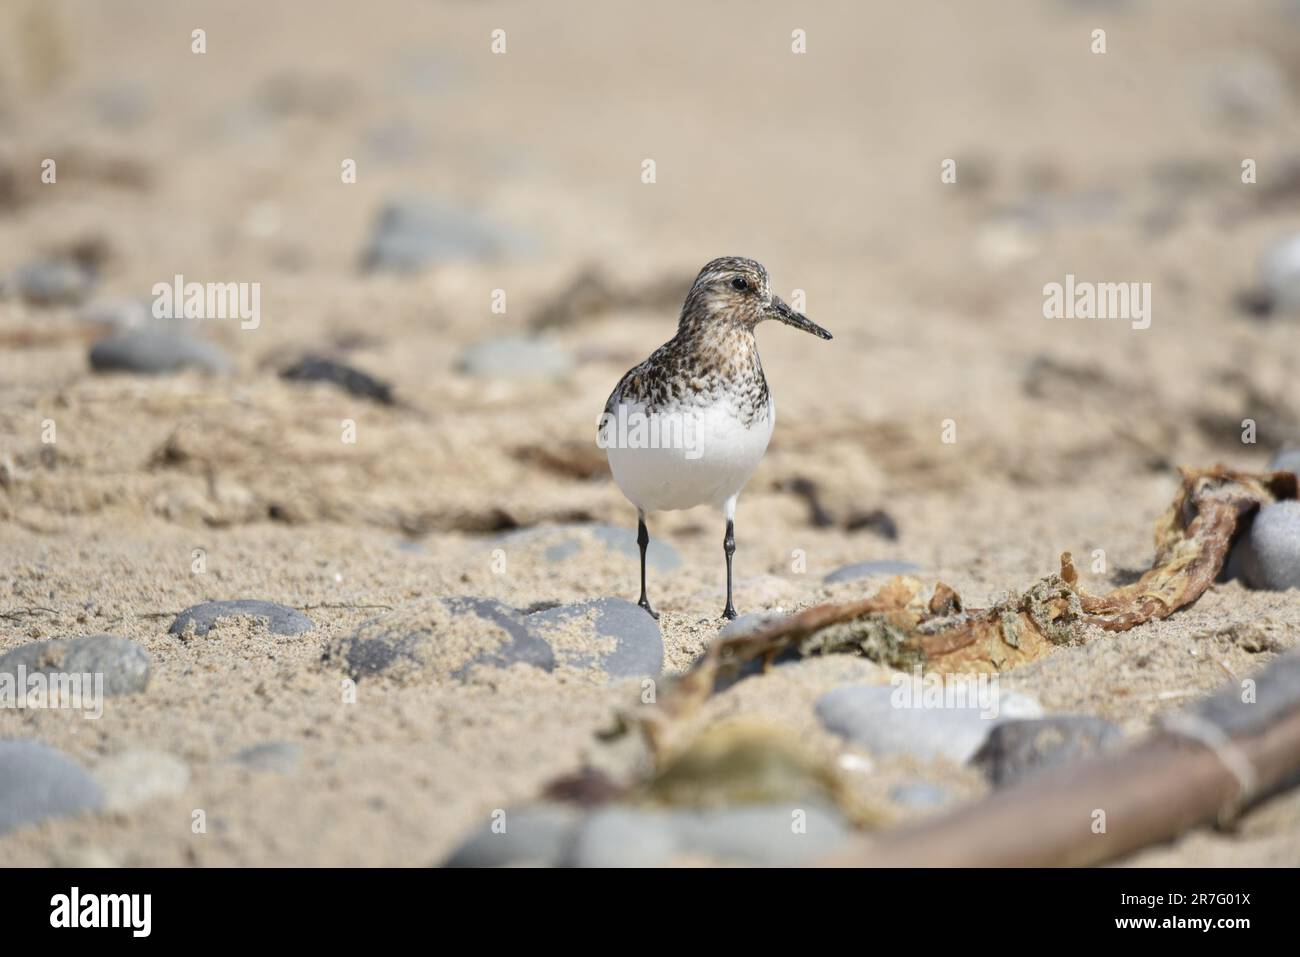 Close-Up, Facing Image of a Sanderling (Calidris alba) Standing on a Pebble Beach Looking to Right of Image, on a Sunny Day on the Isle of Man in May Stock Photo